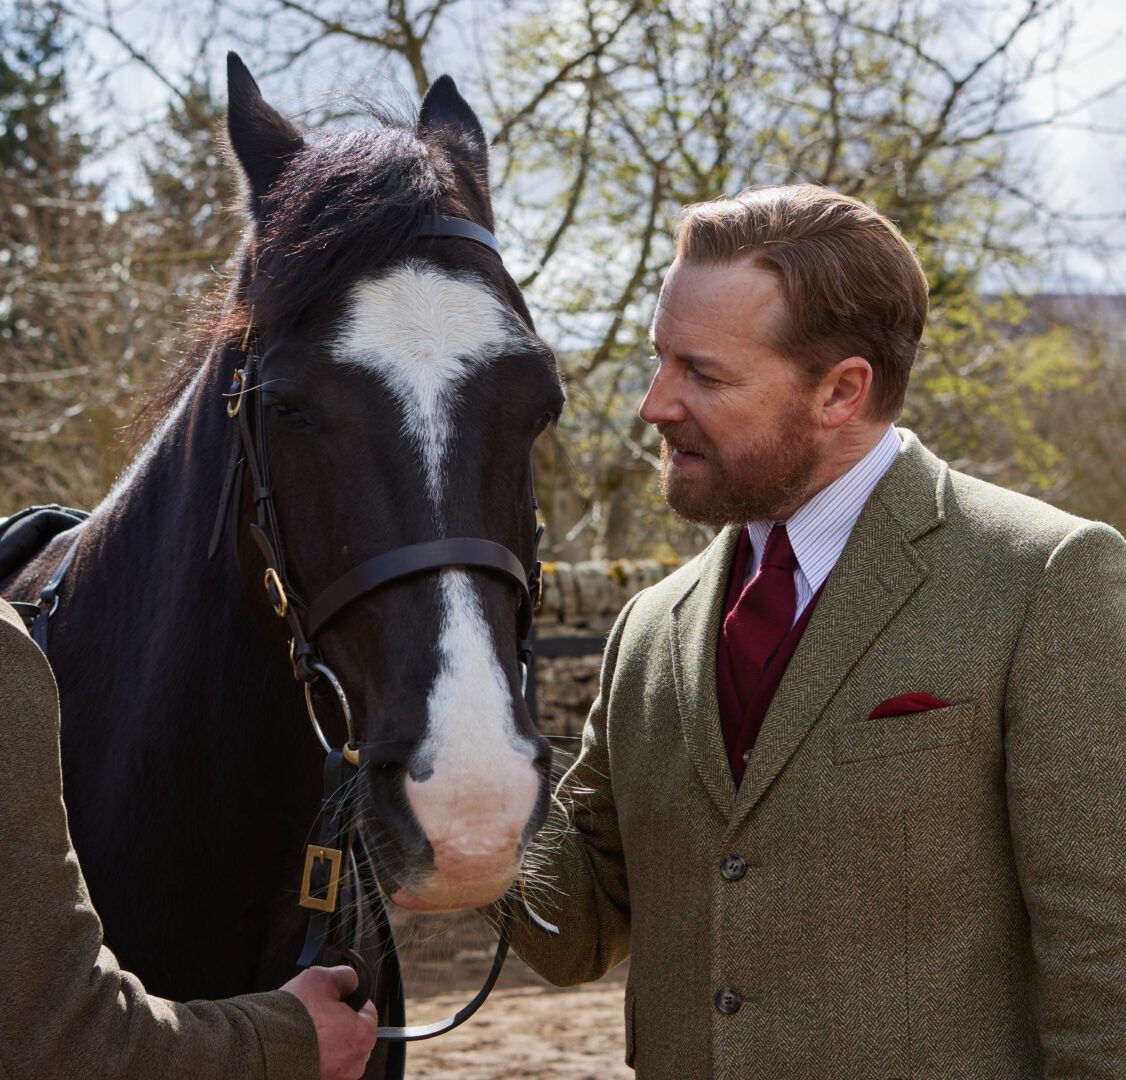 Siegfried wears a wool suit and looks adoringly at a horse in All Creatures Great and Small.